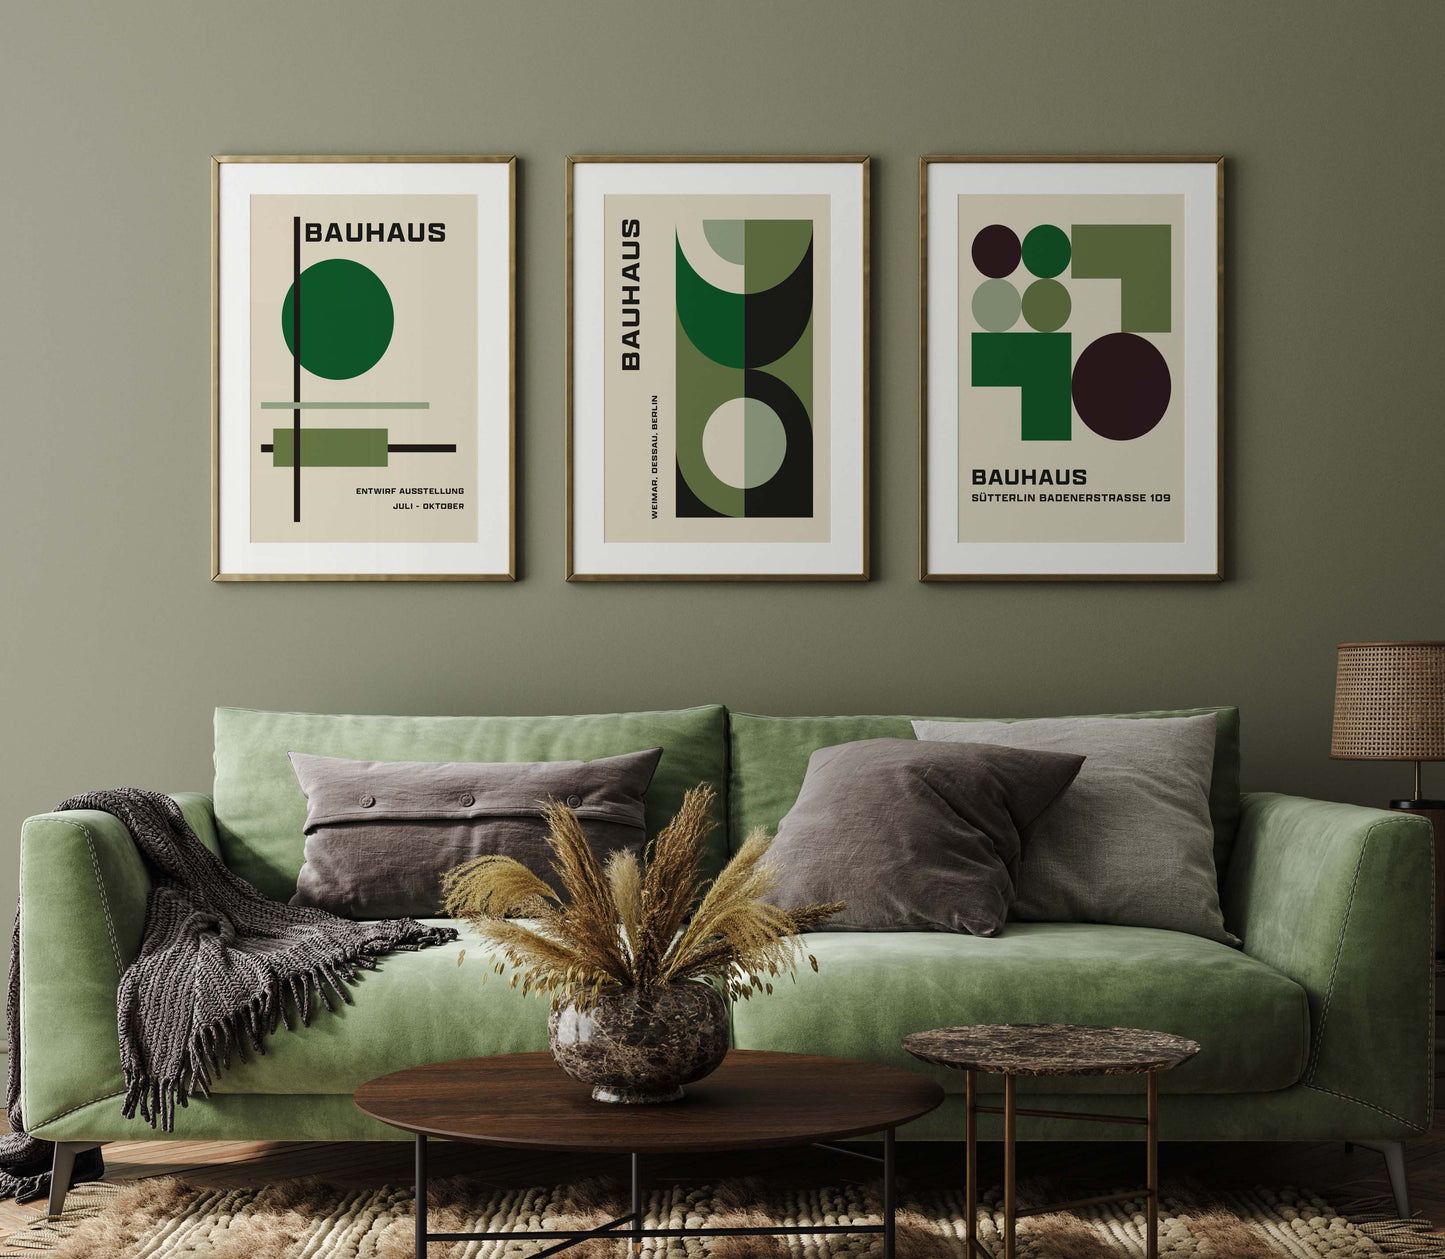 Bauhaus prints in green in a minimalist style, set of 3